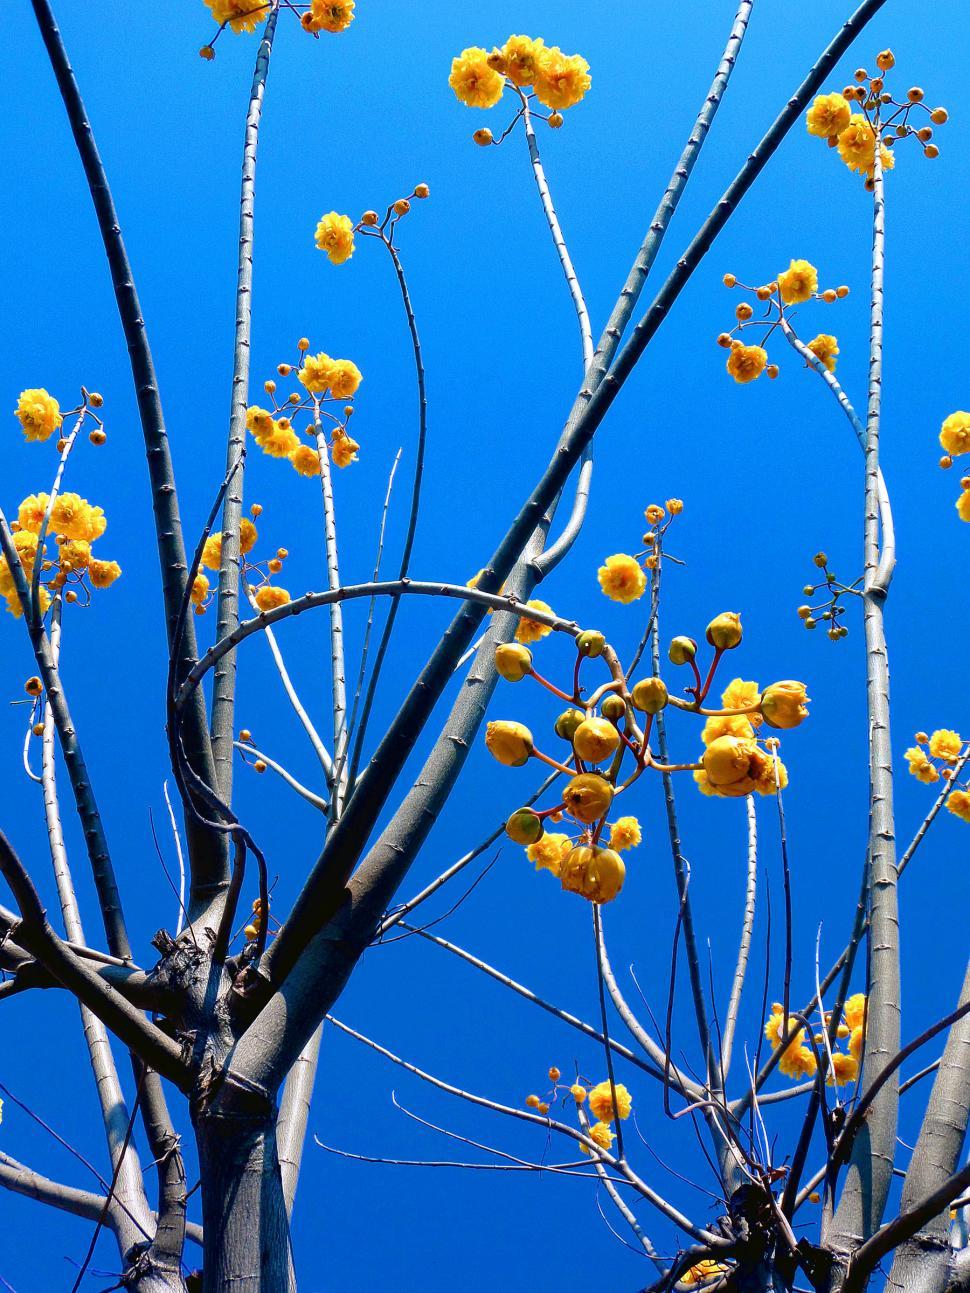 Free Image of Flowers on a leafless tree 